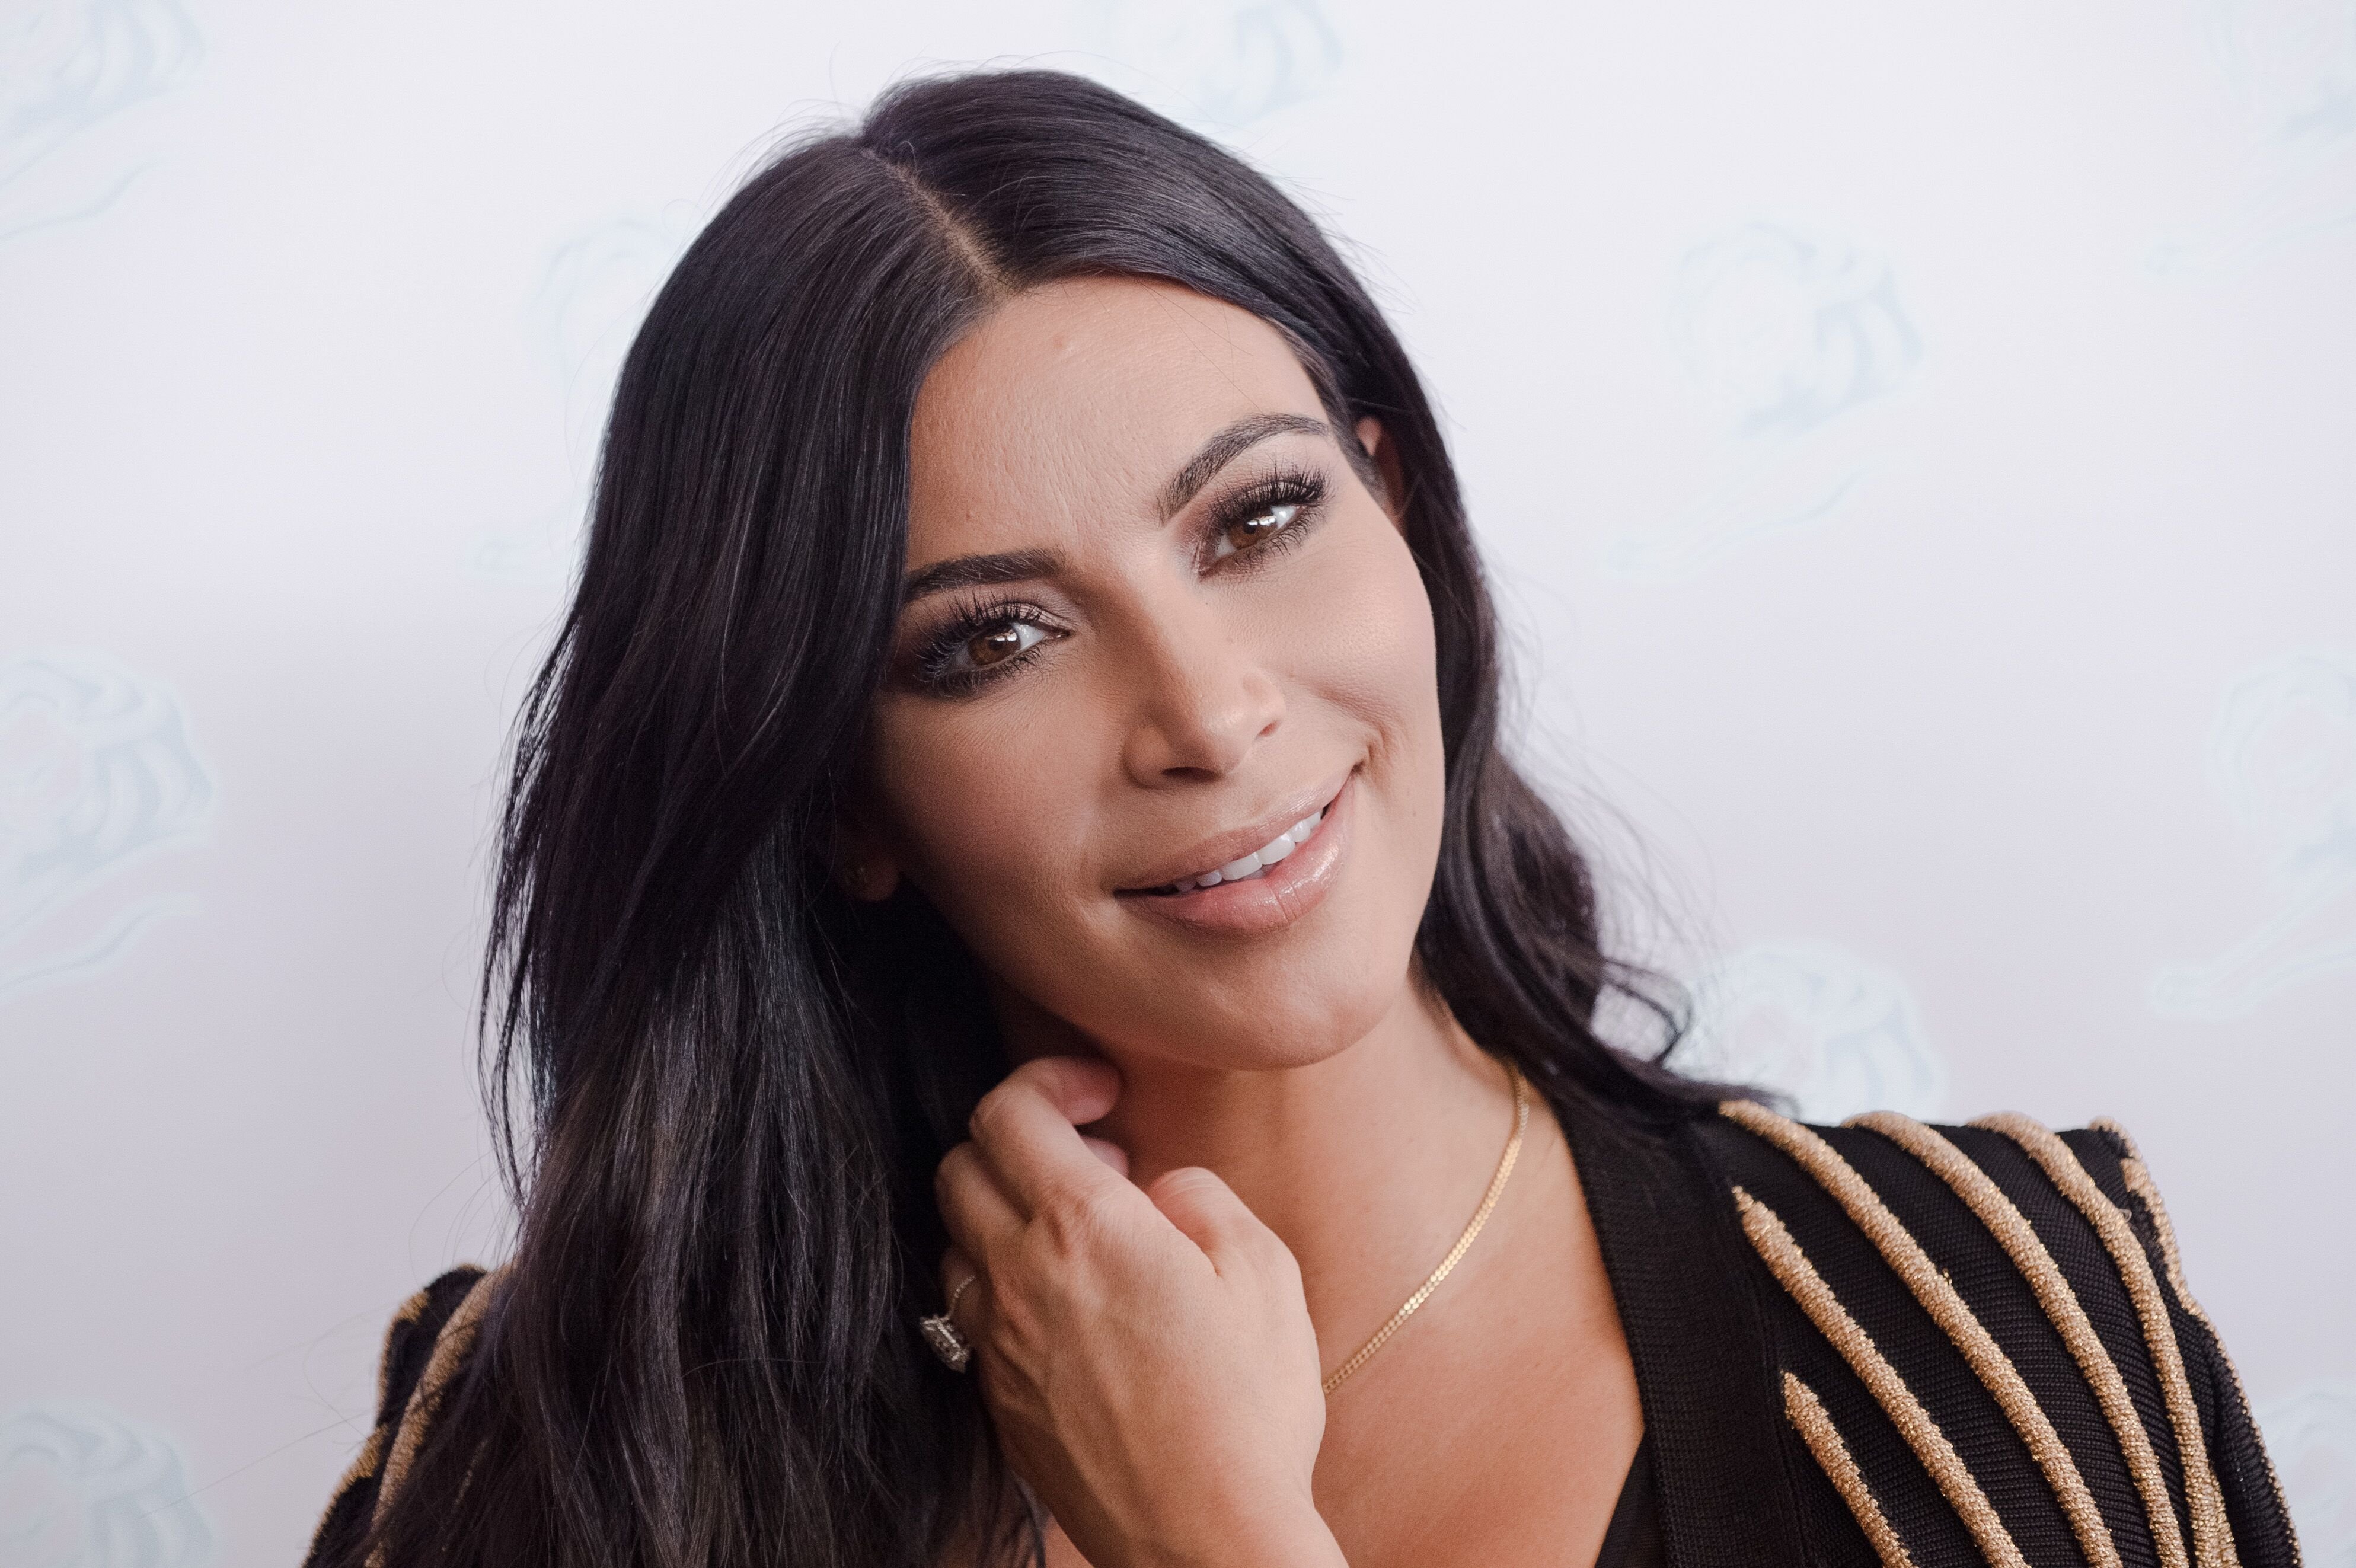 Kim Kardashian at a 'Sudler' talk during Cannes Lions International Festival of Creativity on June 24, 2015 in Cannes, France | Photo: Getty Images